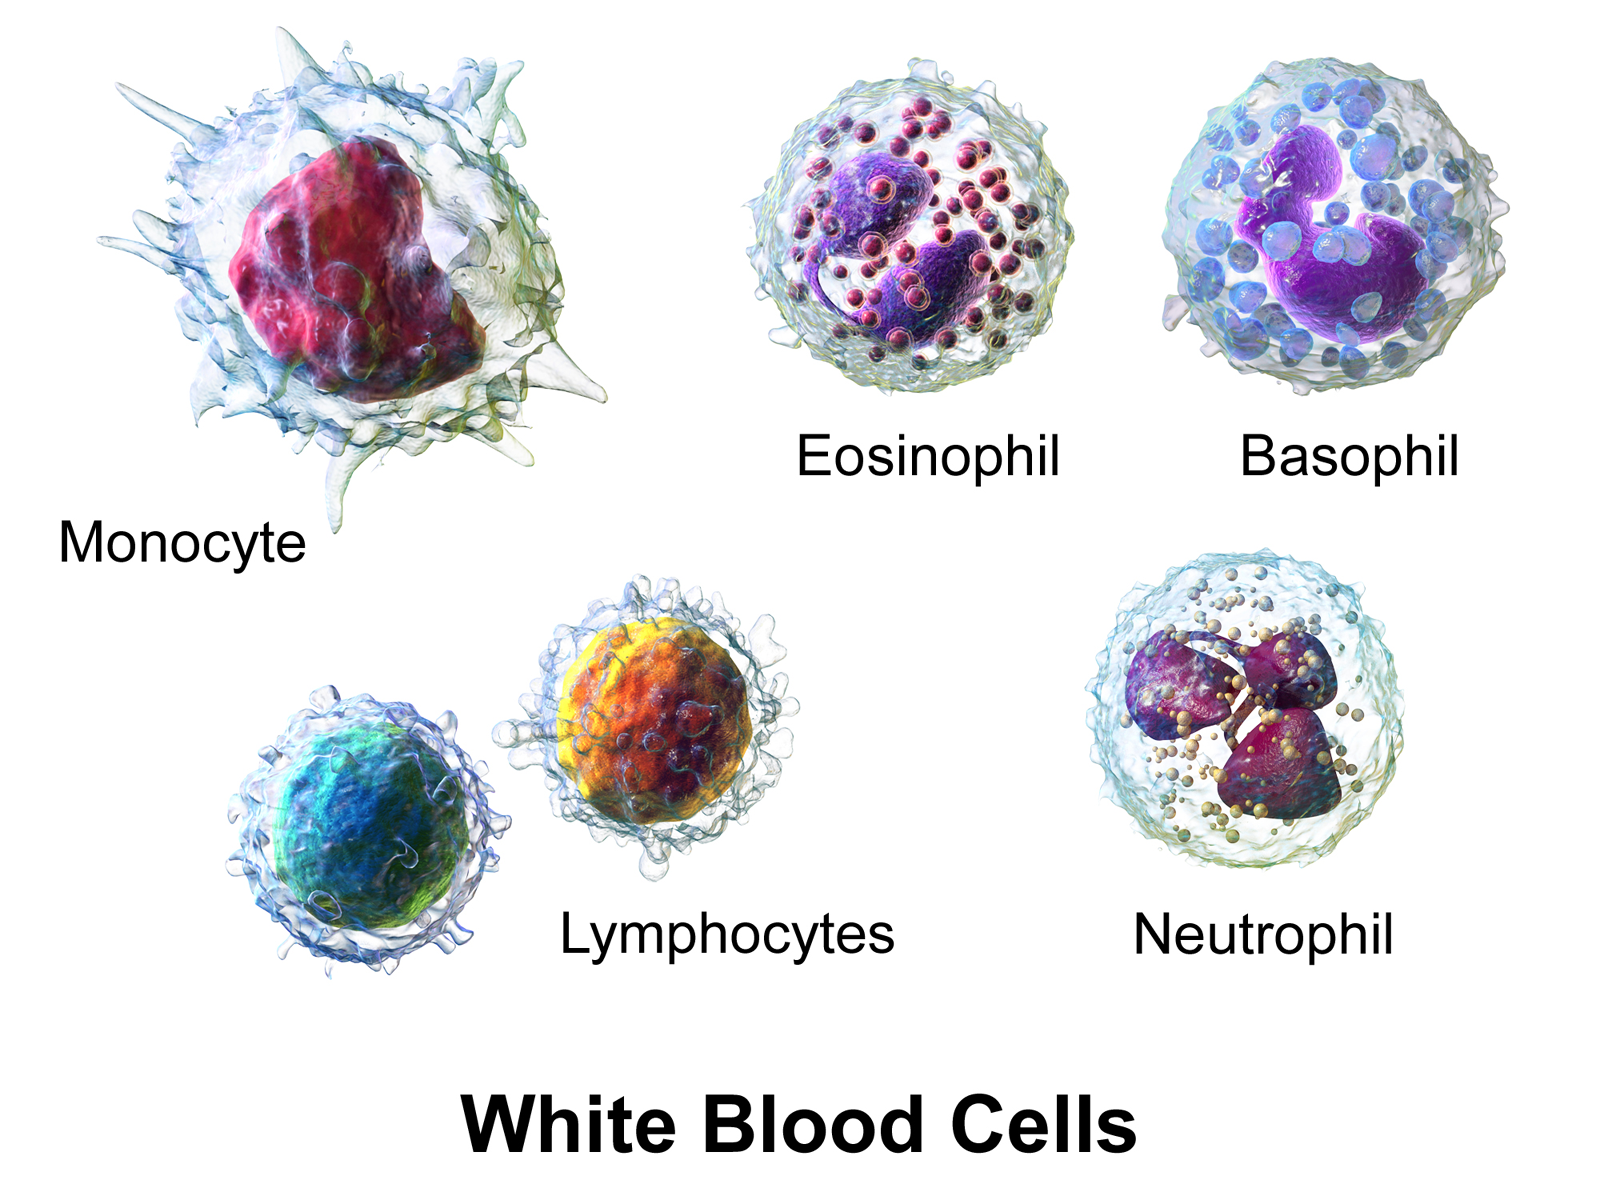 Major types of white blood cells.